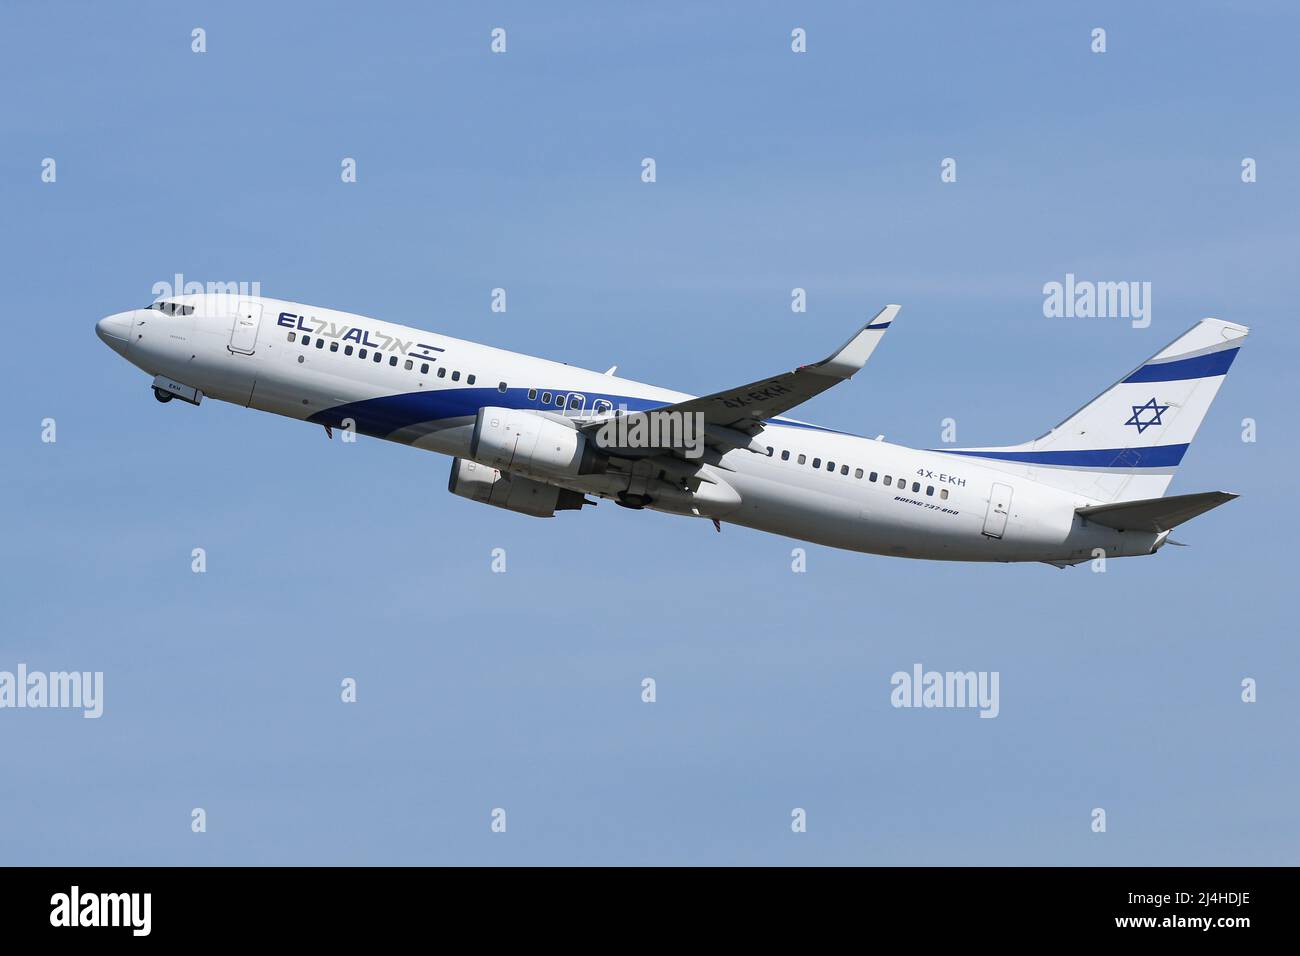 A Boeing 737 operated by El Al departs from London Heathrow Airport Stock Photo